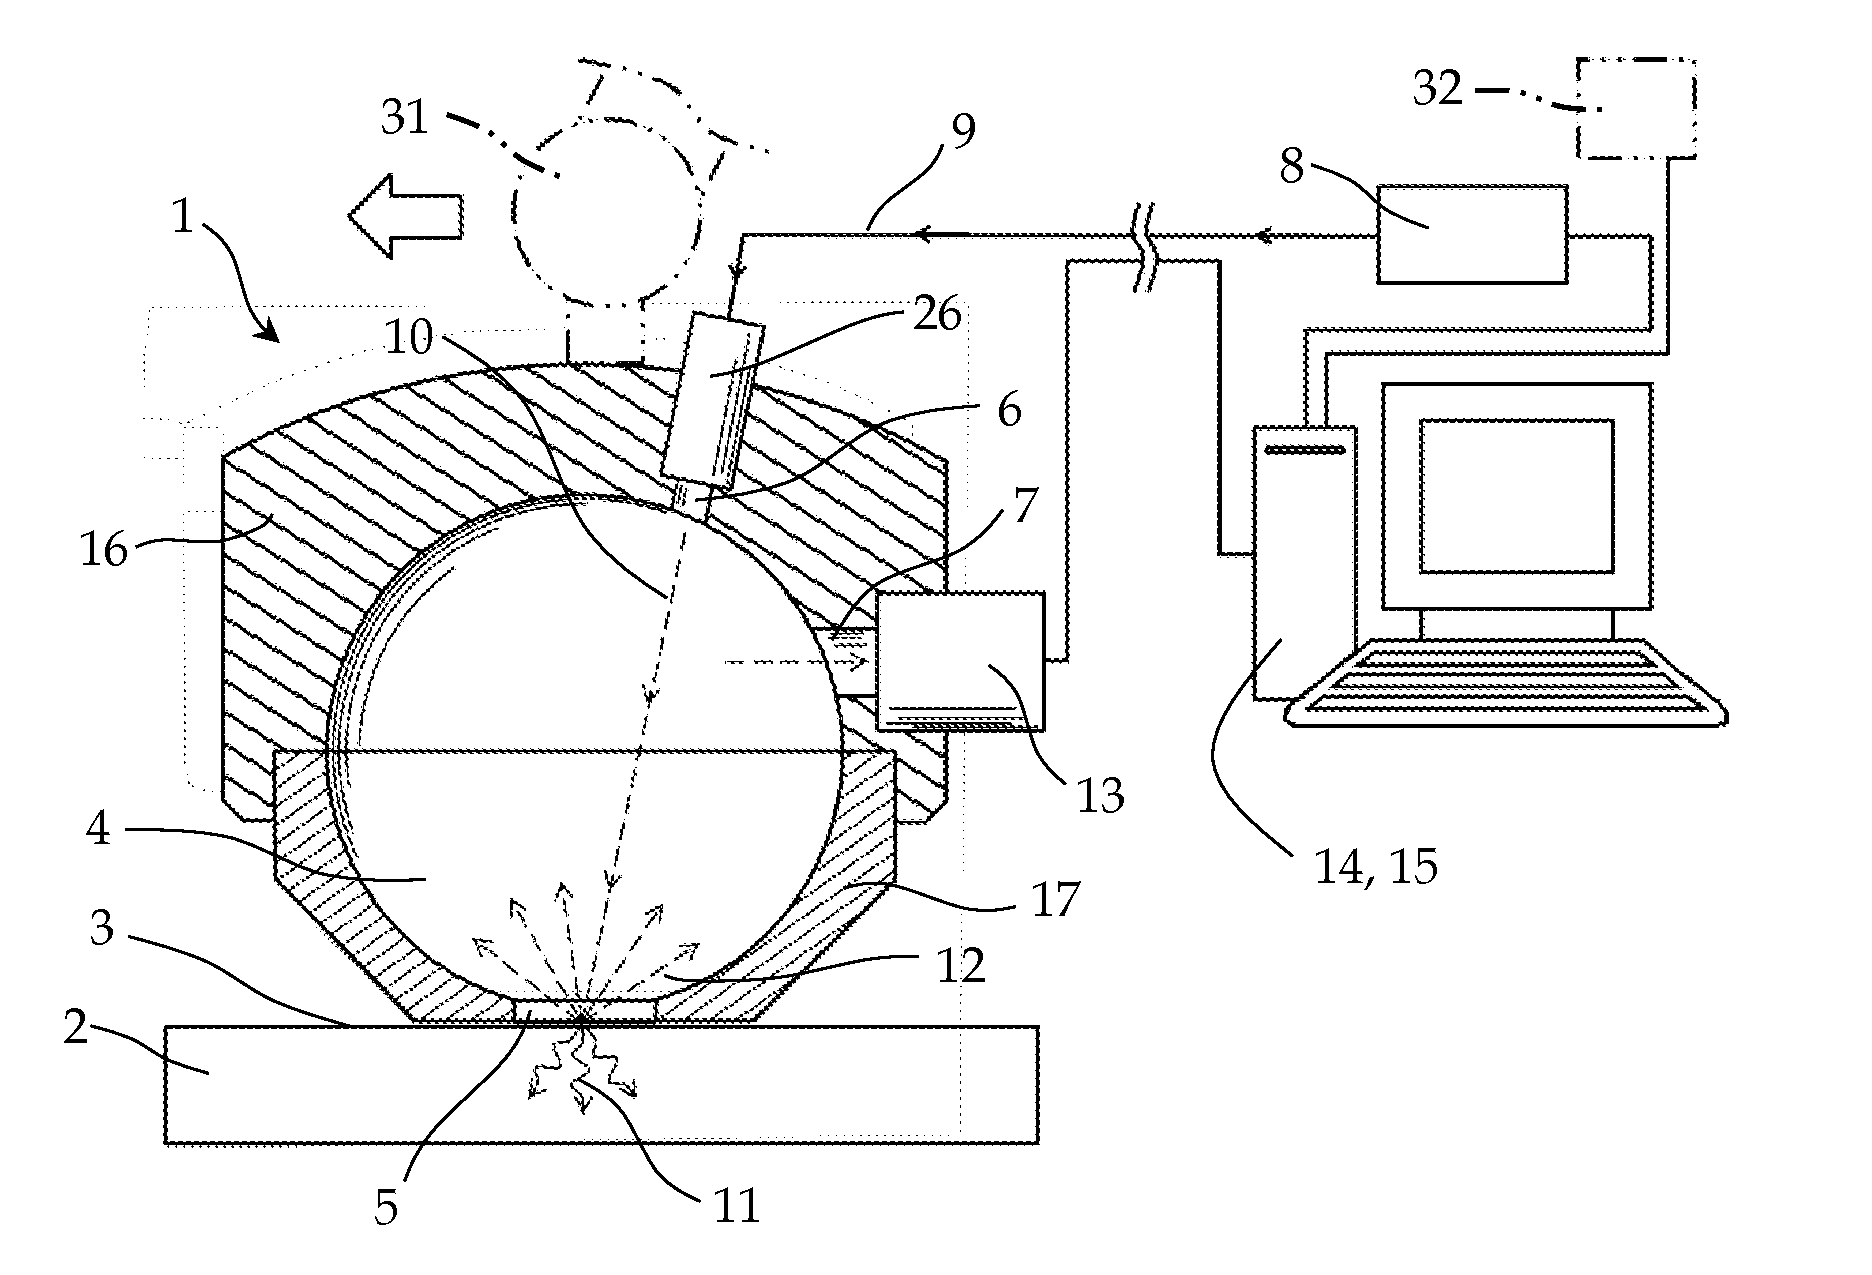 Apparatus and method for controlled laser heating